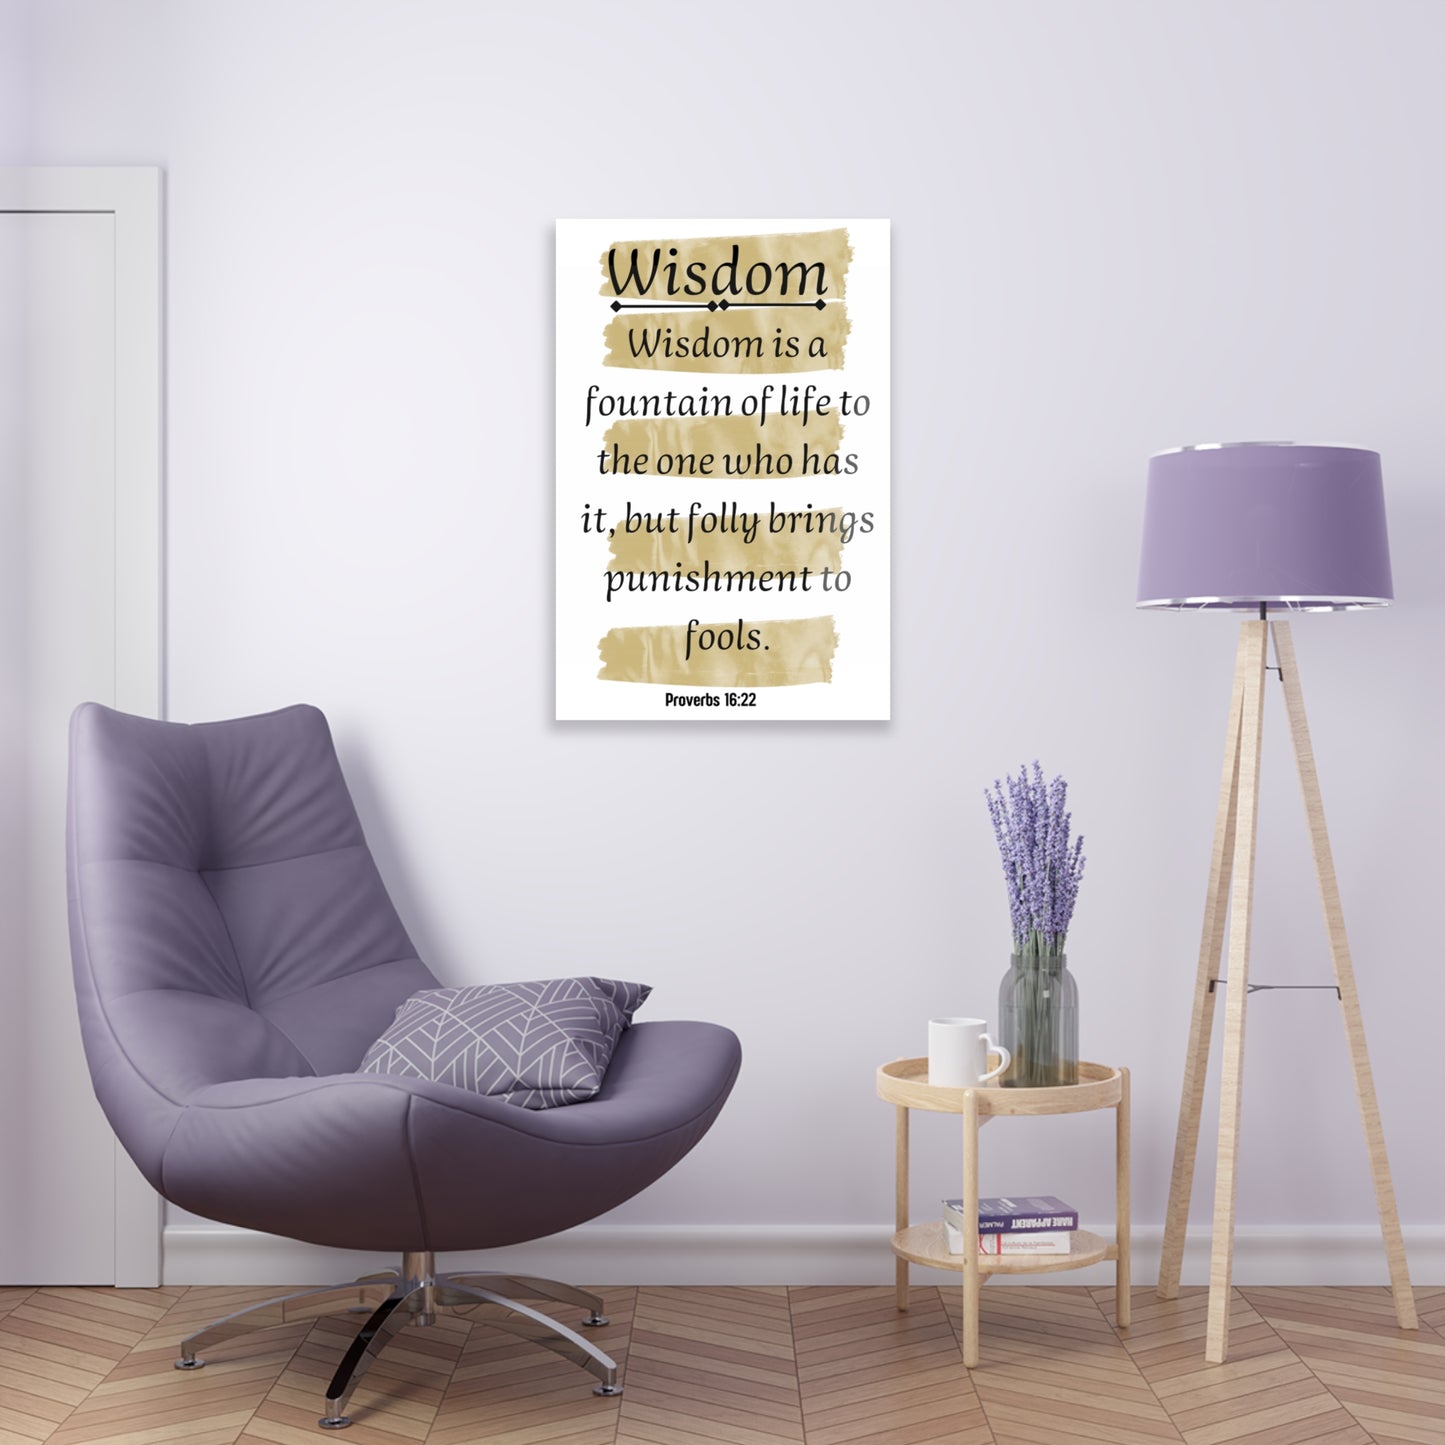 Large Wall Hanging - Acrylic Print with Inspirational Scripture | Art & Wall Decor,Assembled in the USA,Assembled in USA,Decor,Home & Living,Home Decor,Indoor,Made in the USA,Made in USA,Poster